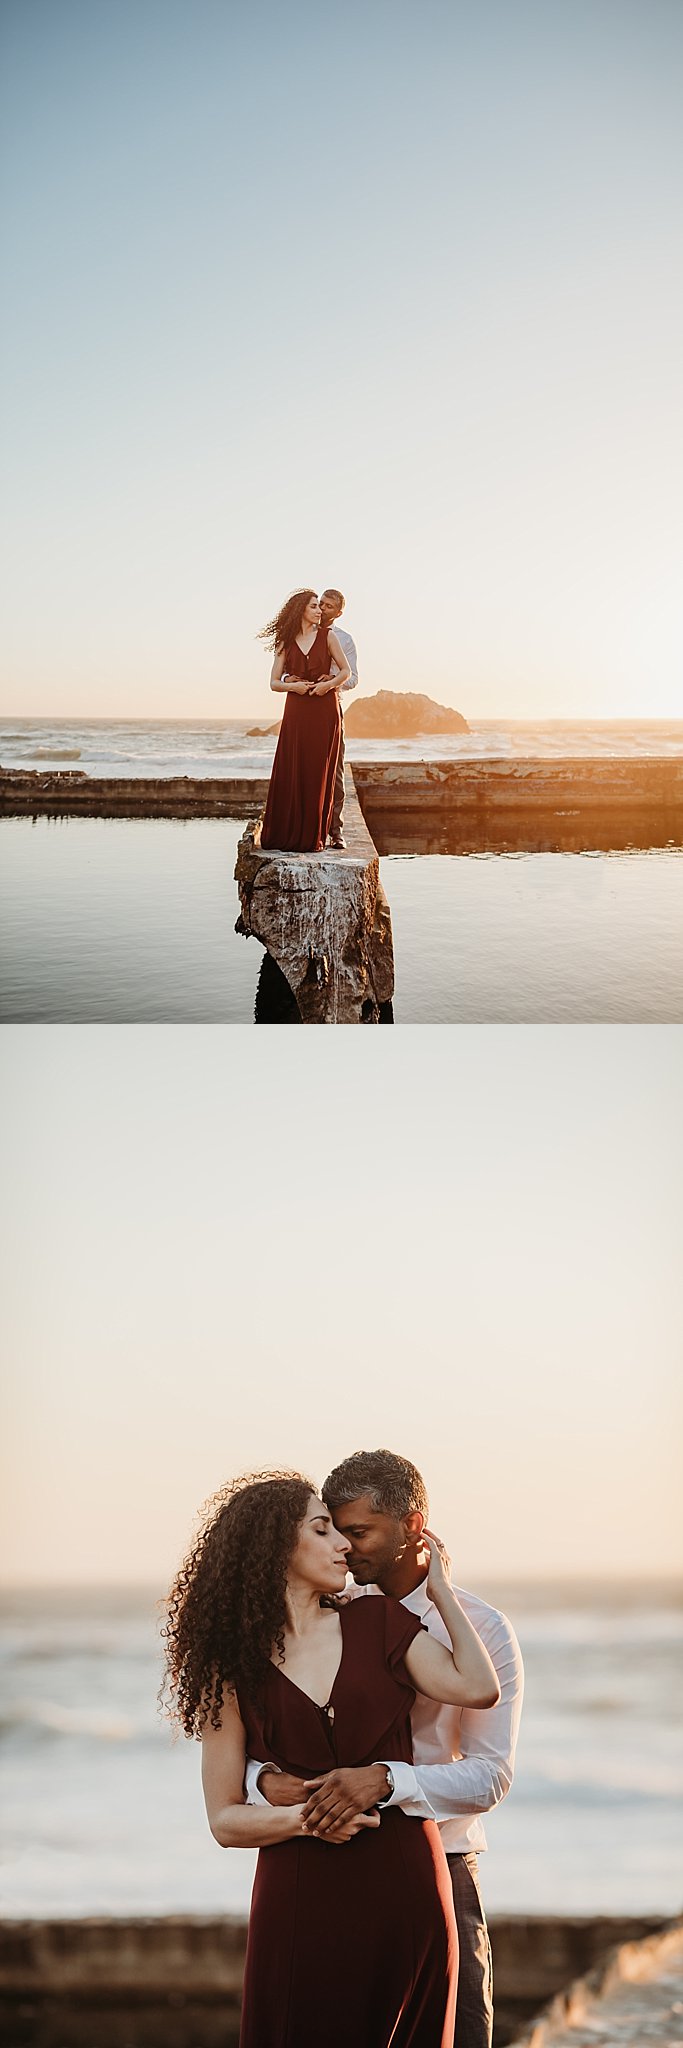 Two images of a man hugging a woman from behind standing on a ledge during their Sutro Baths engagement photoshoot.